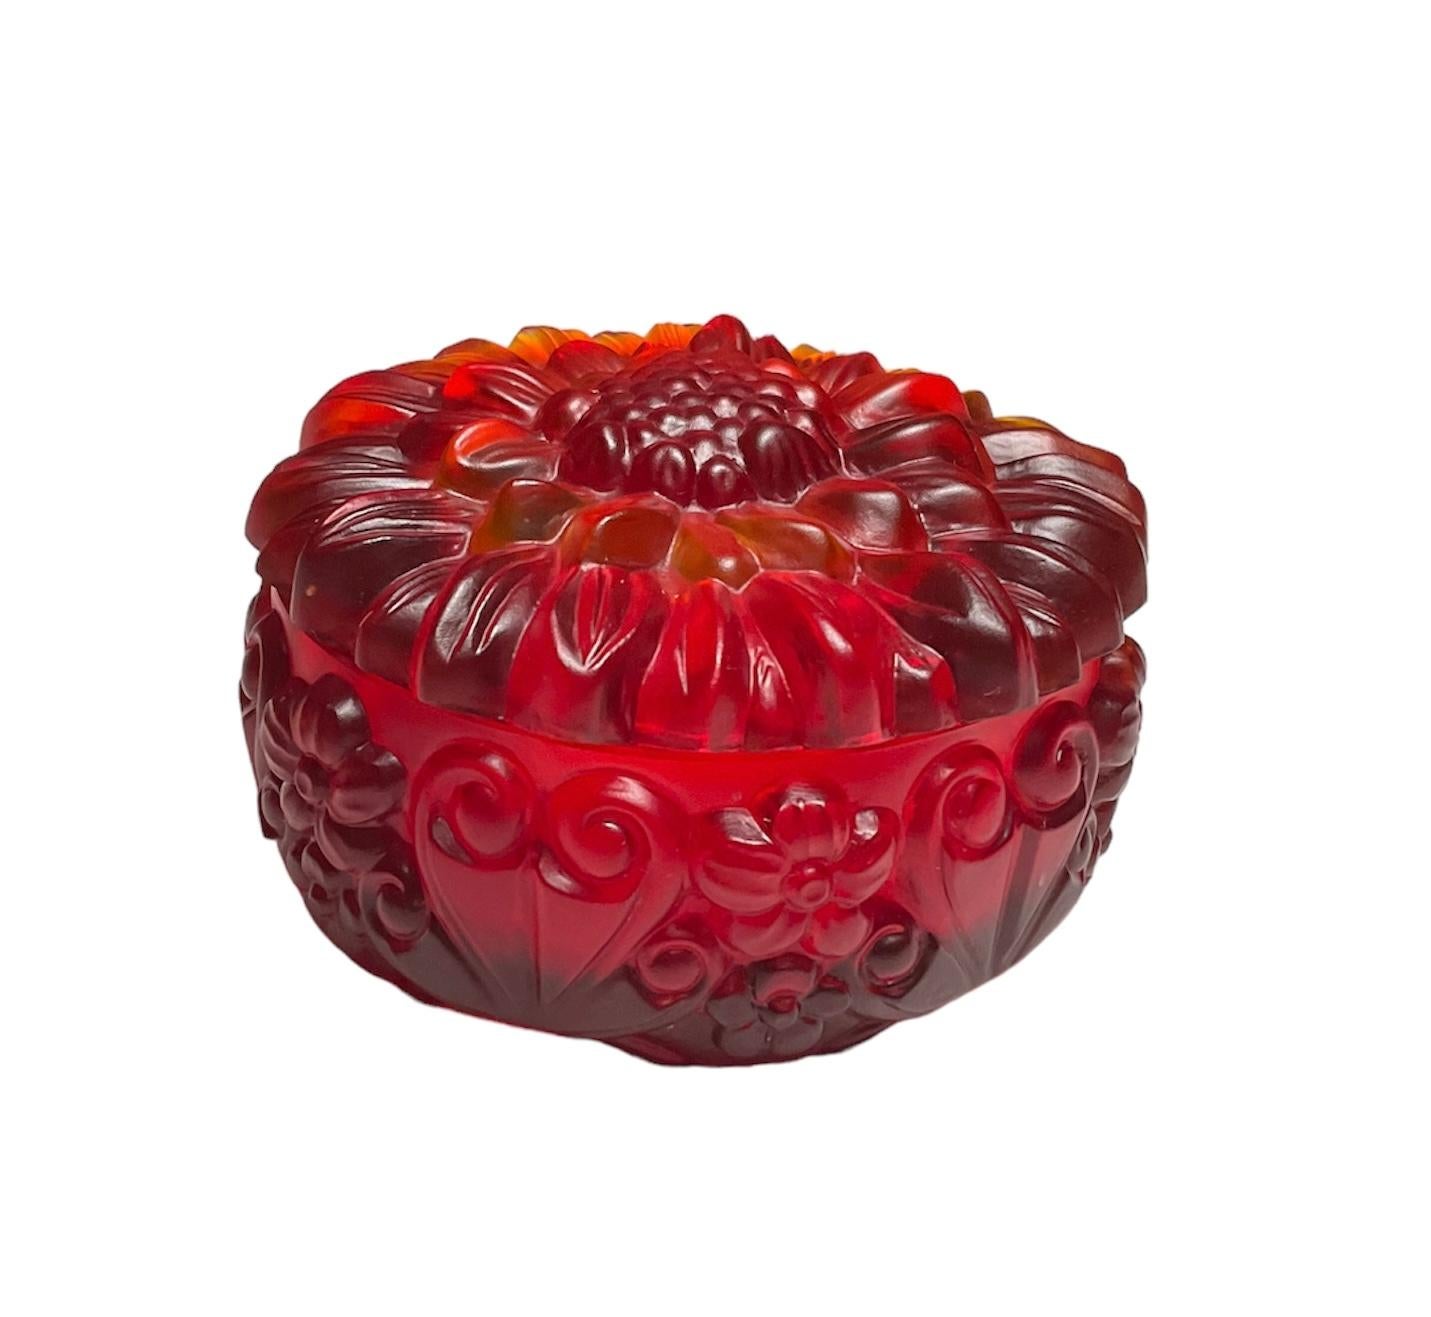 This is a H.Hoffman Red Glass Round Powder, Jewelry or Vanity Lidded Box. It depicts a round bowl decorated with a relief pattern of flowers and hearts. Also, the lid is adorned with a relief of a large peony like flower.